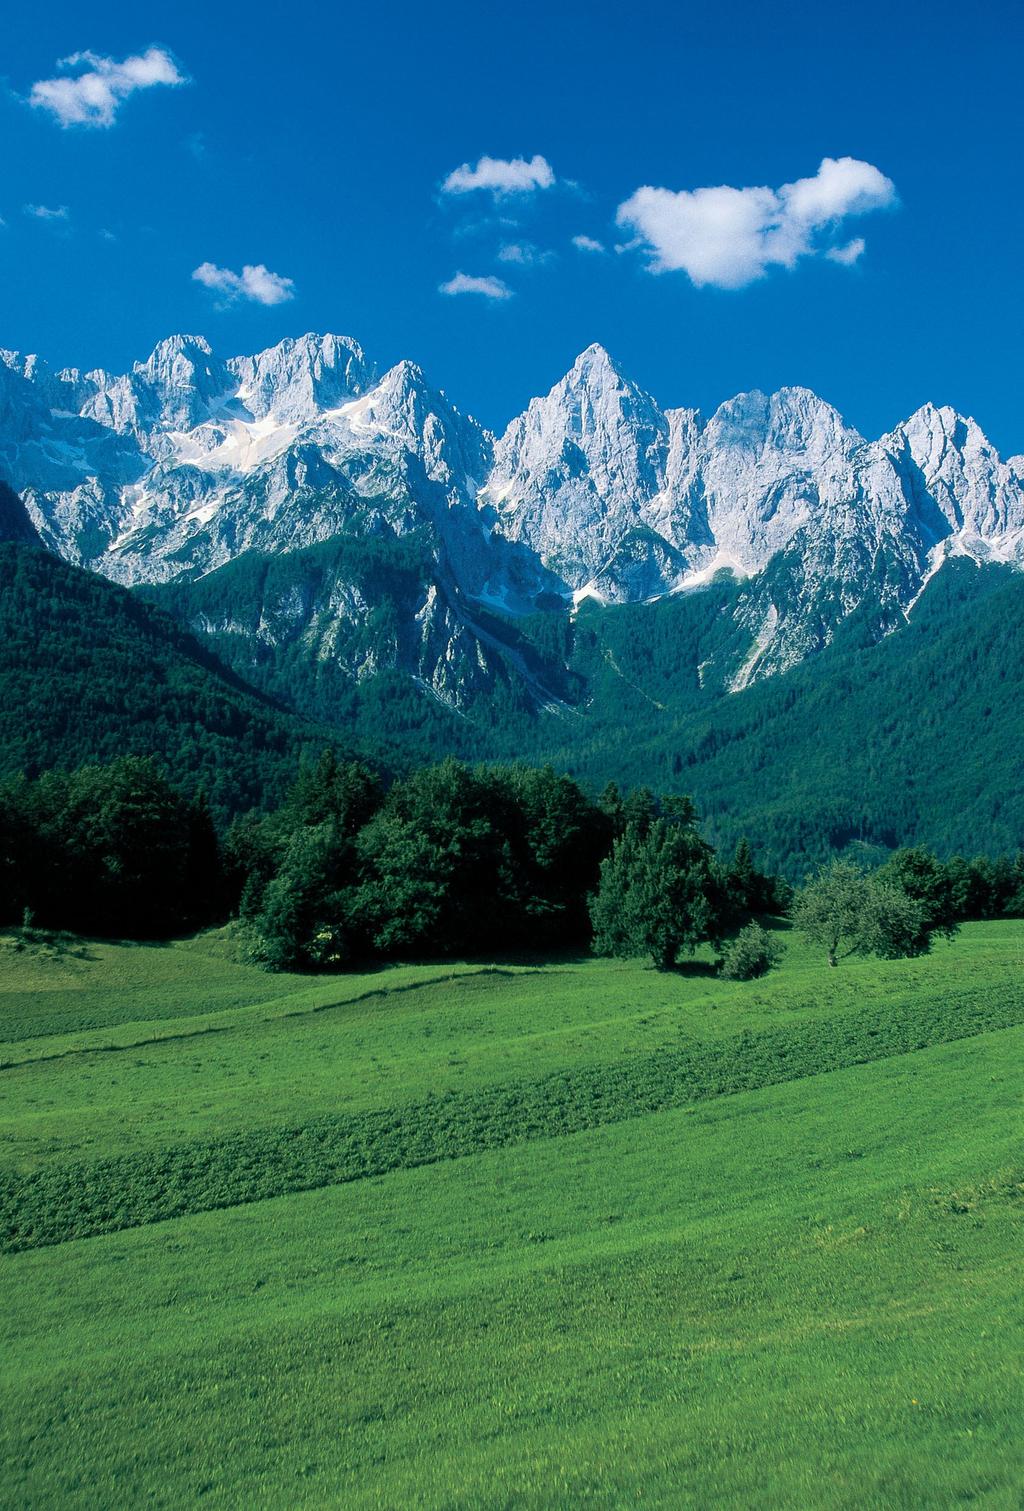 Zarja s Unforgettable Journey Travel through Slovenia with the Slovenian Union of America (Formerly Slovenian Women s Union of America) Sponsored by